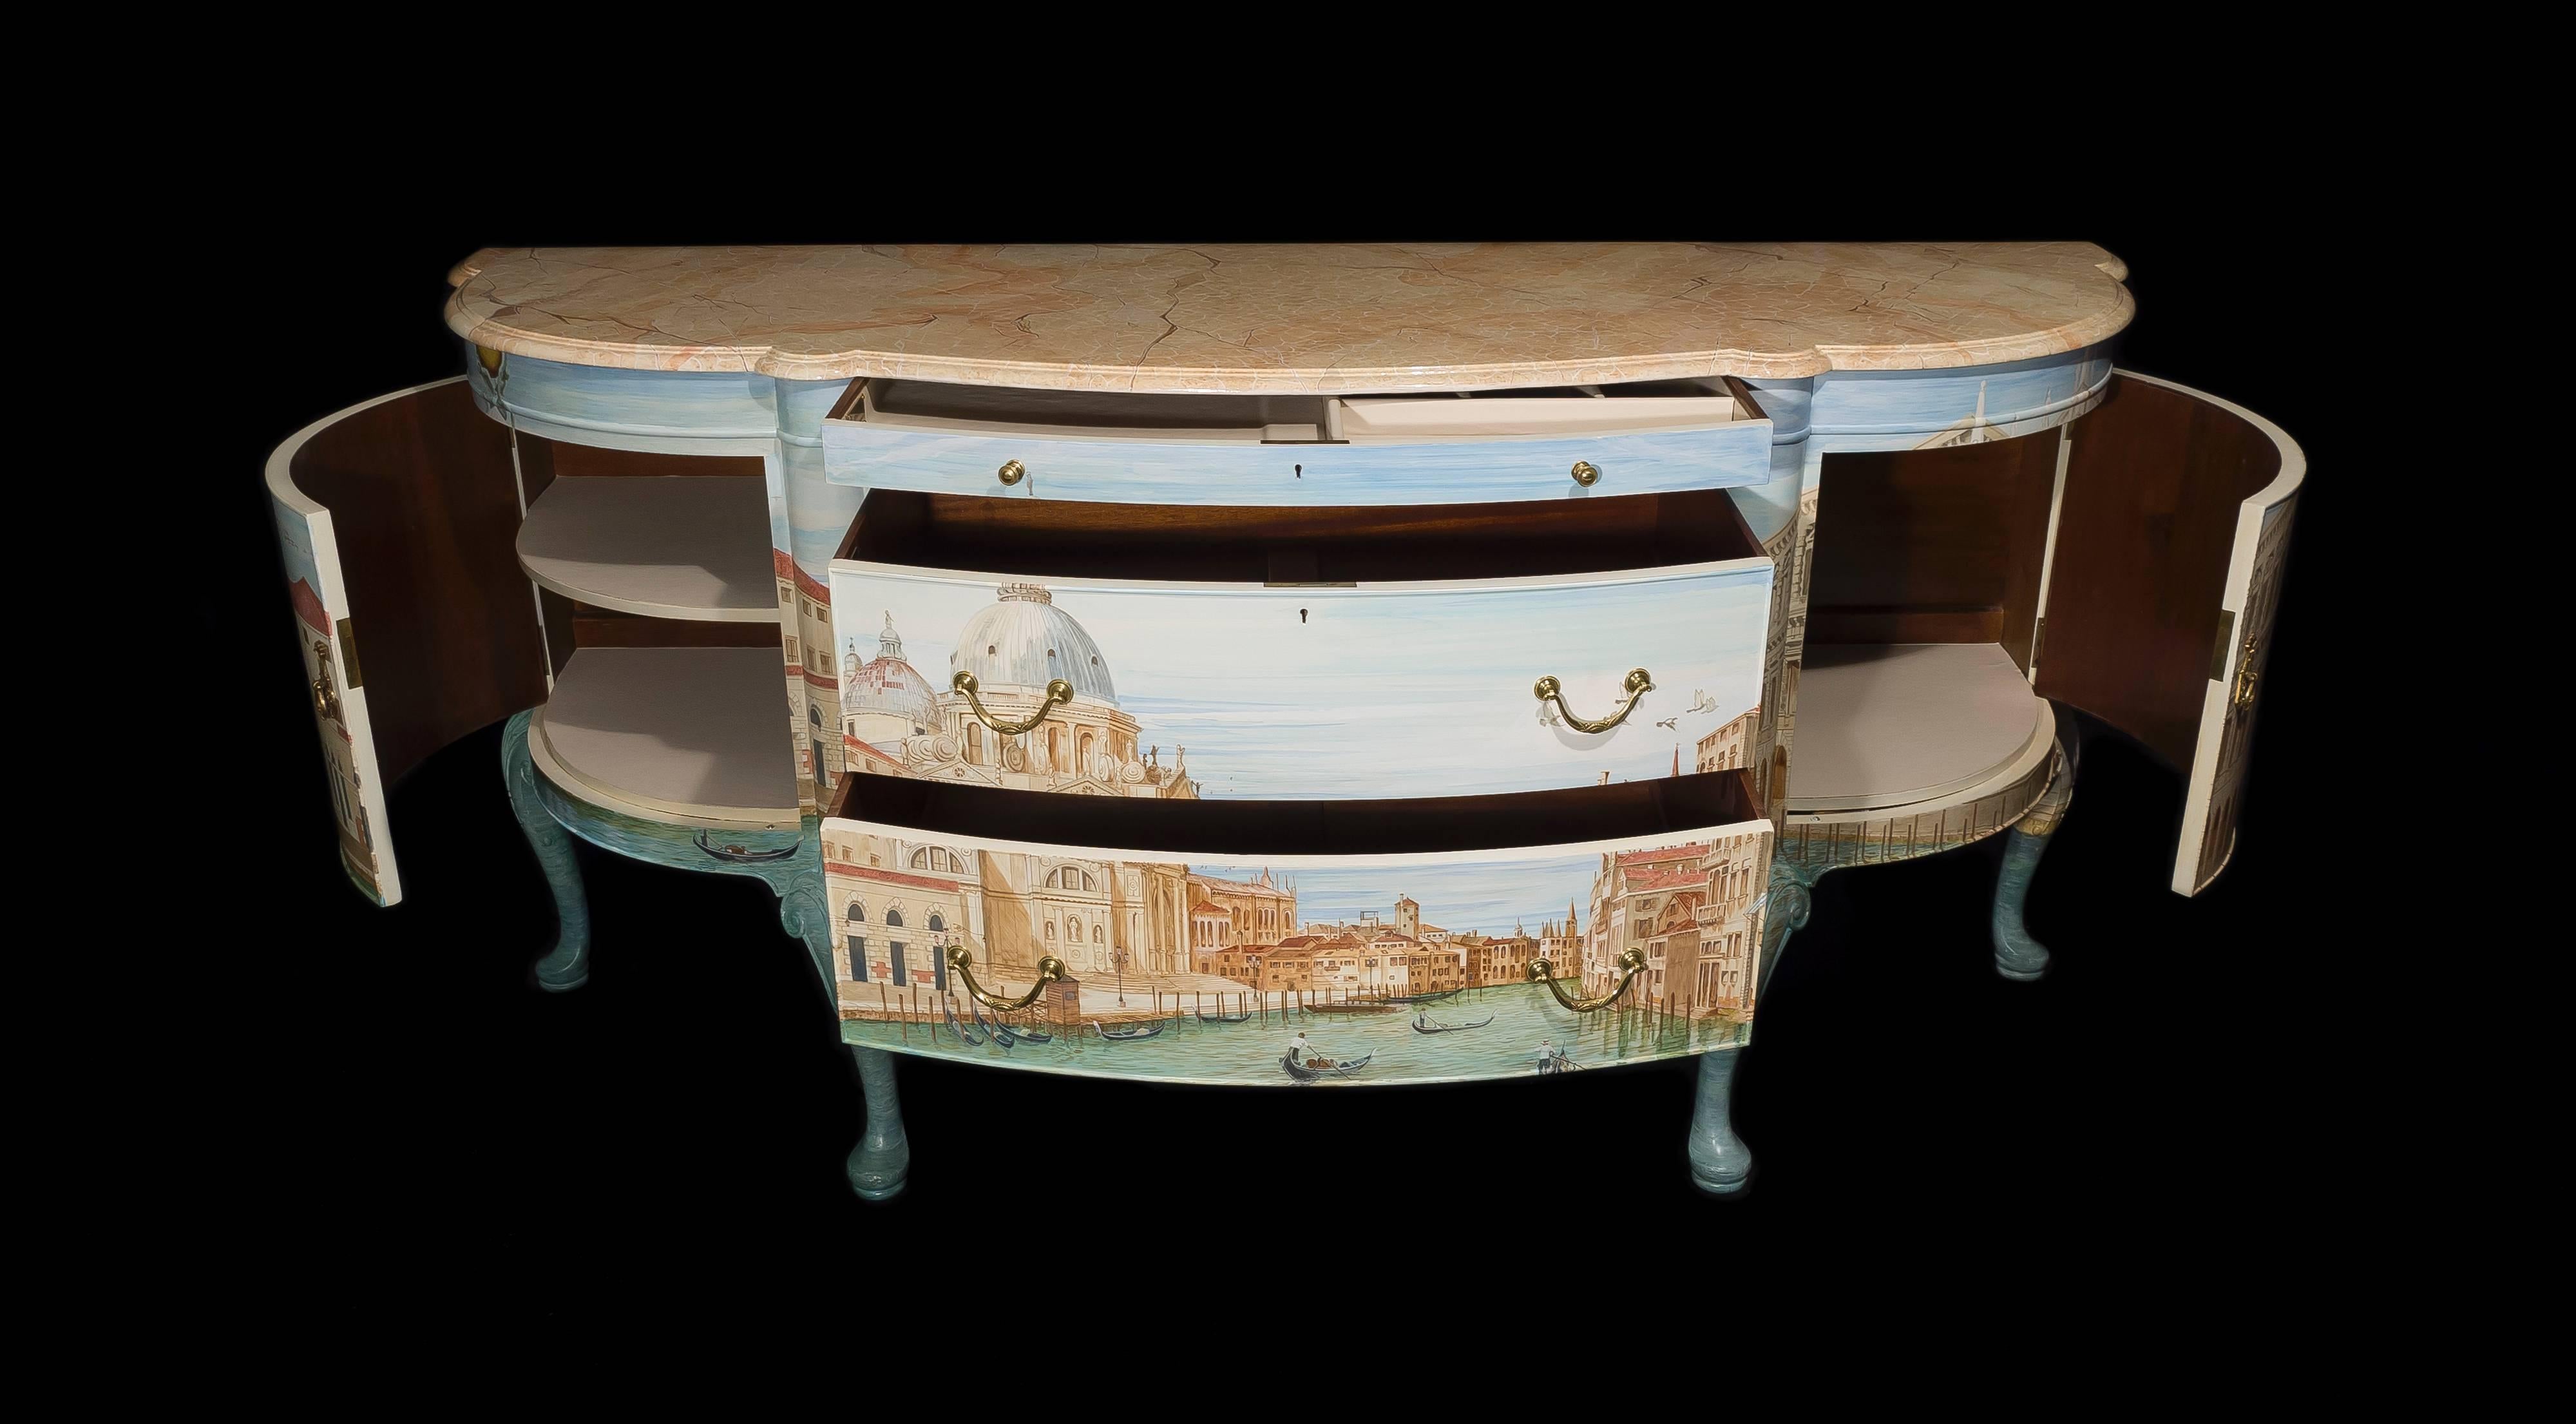 1932 Waring and Gillow British Sideboard Hand-Painted by Kensa Design For Sale 4